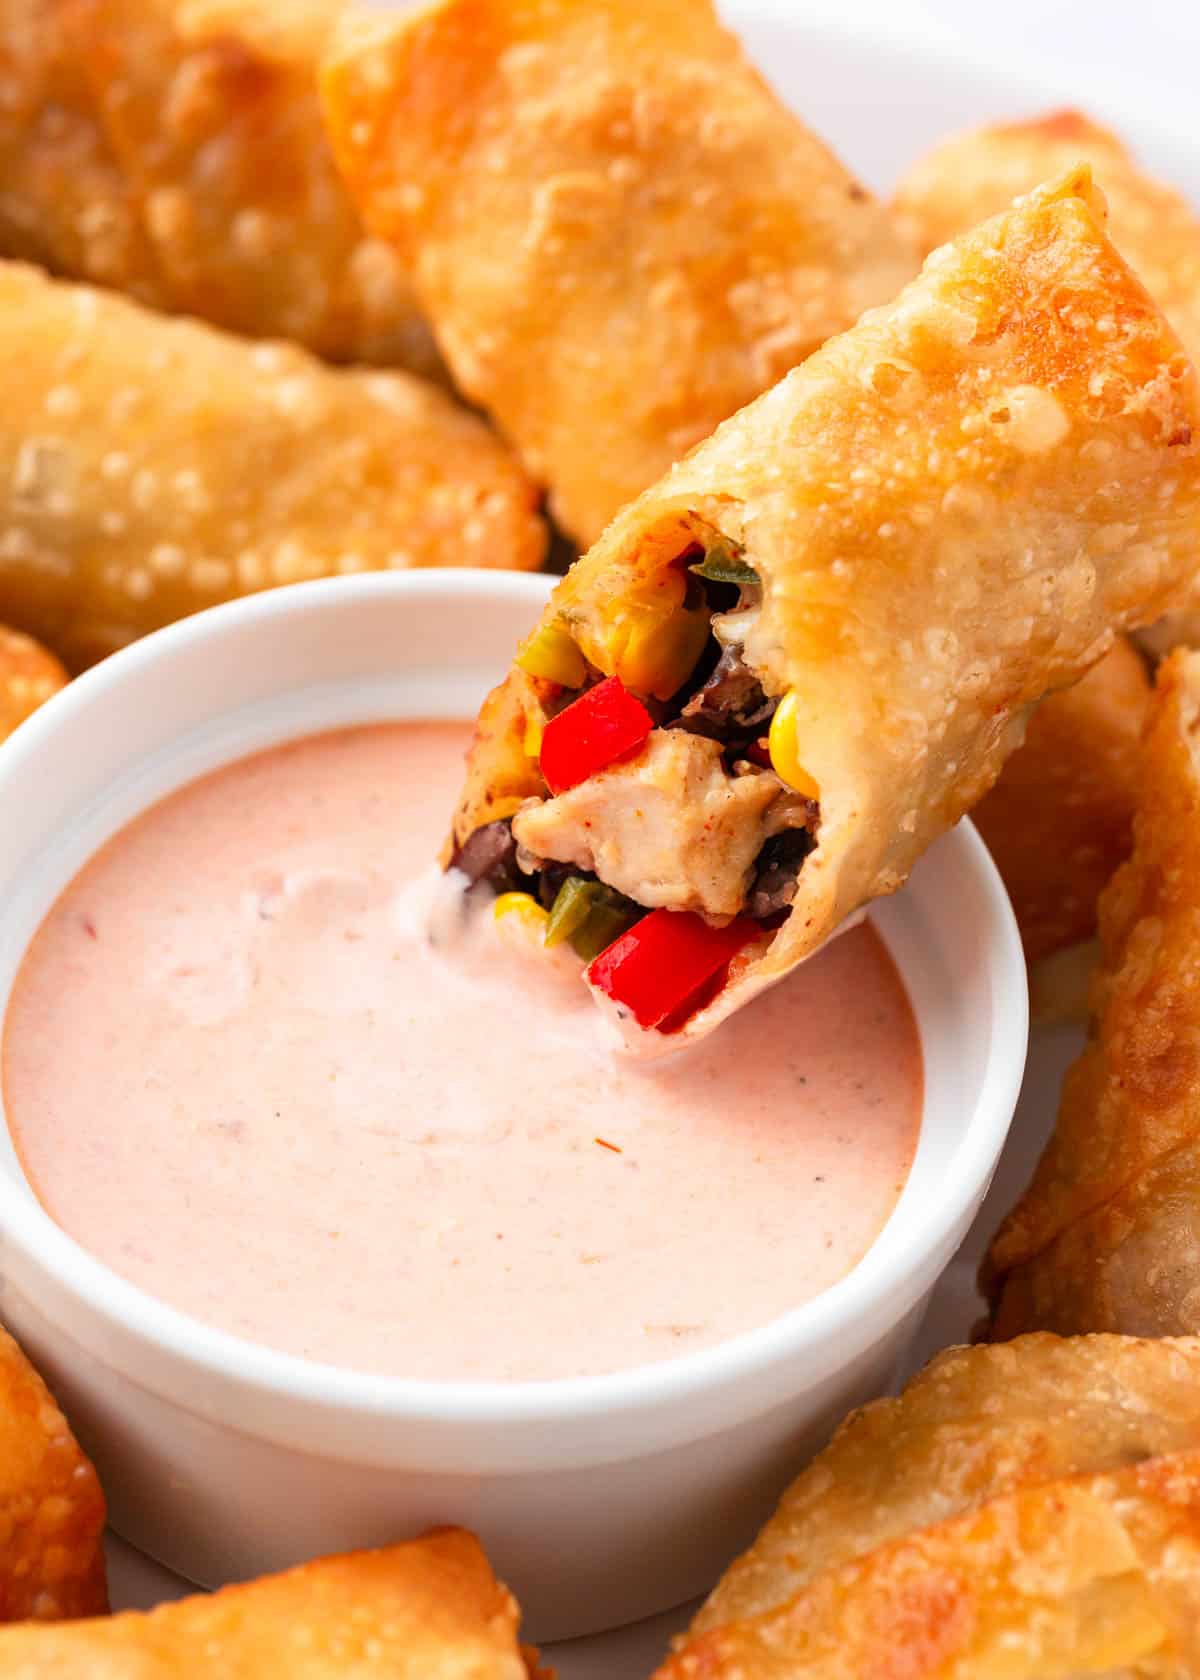 Southwest egg roll dipped into a bowl of sauce.